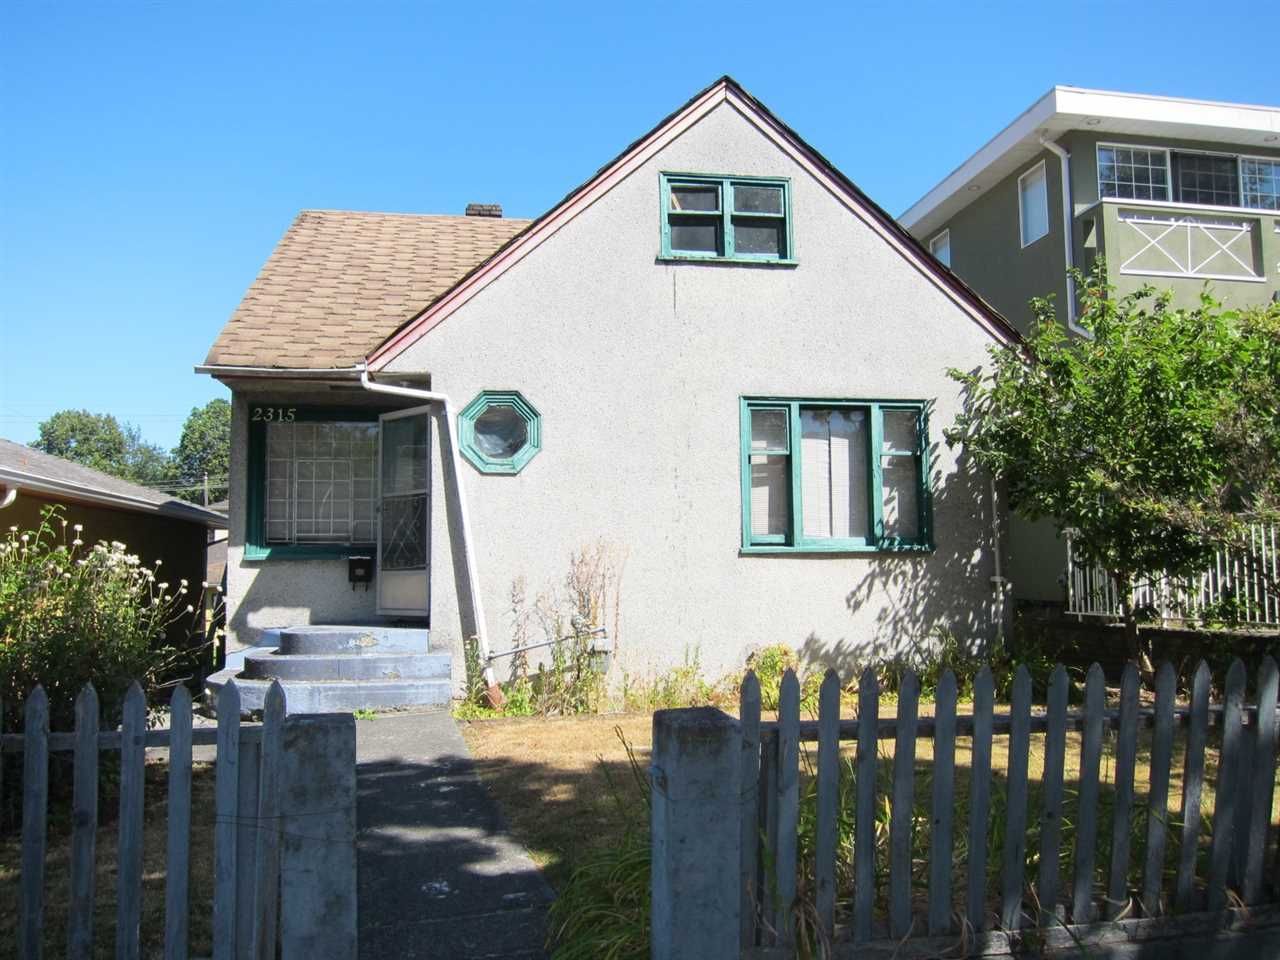 Main Photo: 2315 E 5TH Avenue in Vancouver: Grandview VE House for sale (Vancouver East)  : MLS®# R2200122